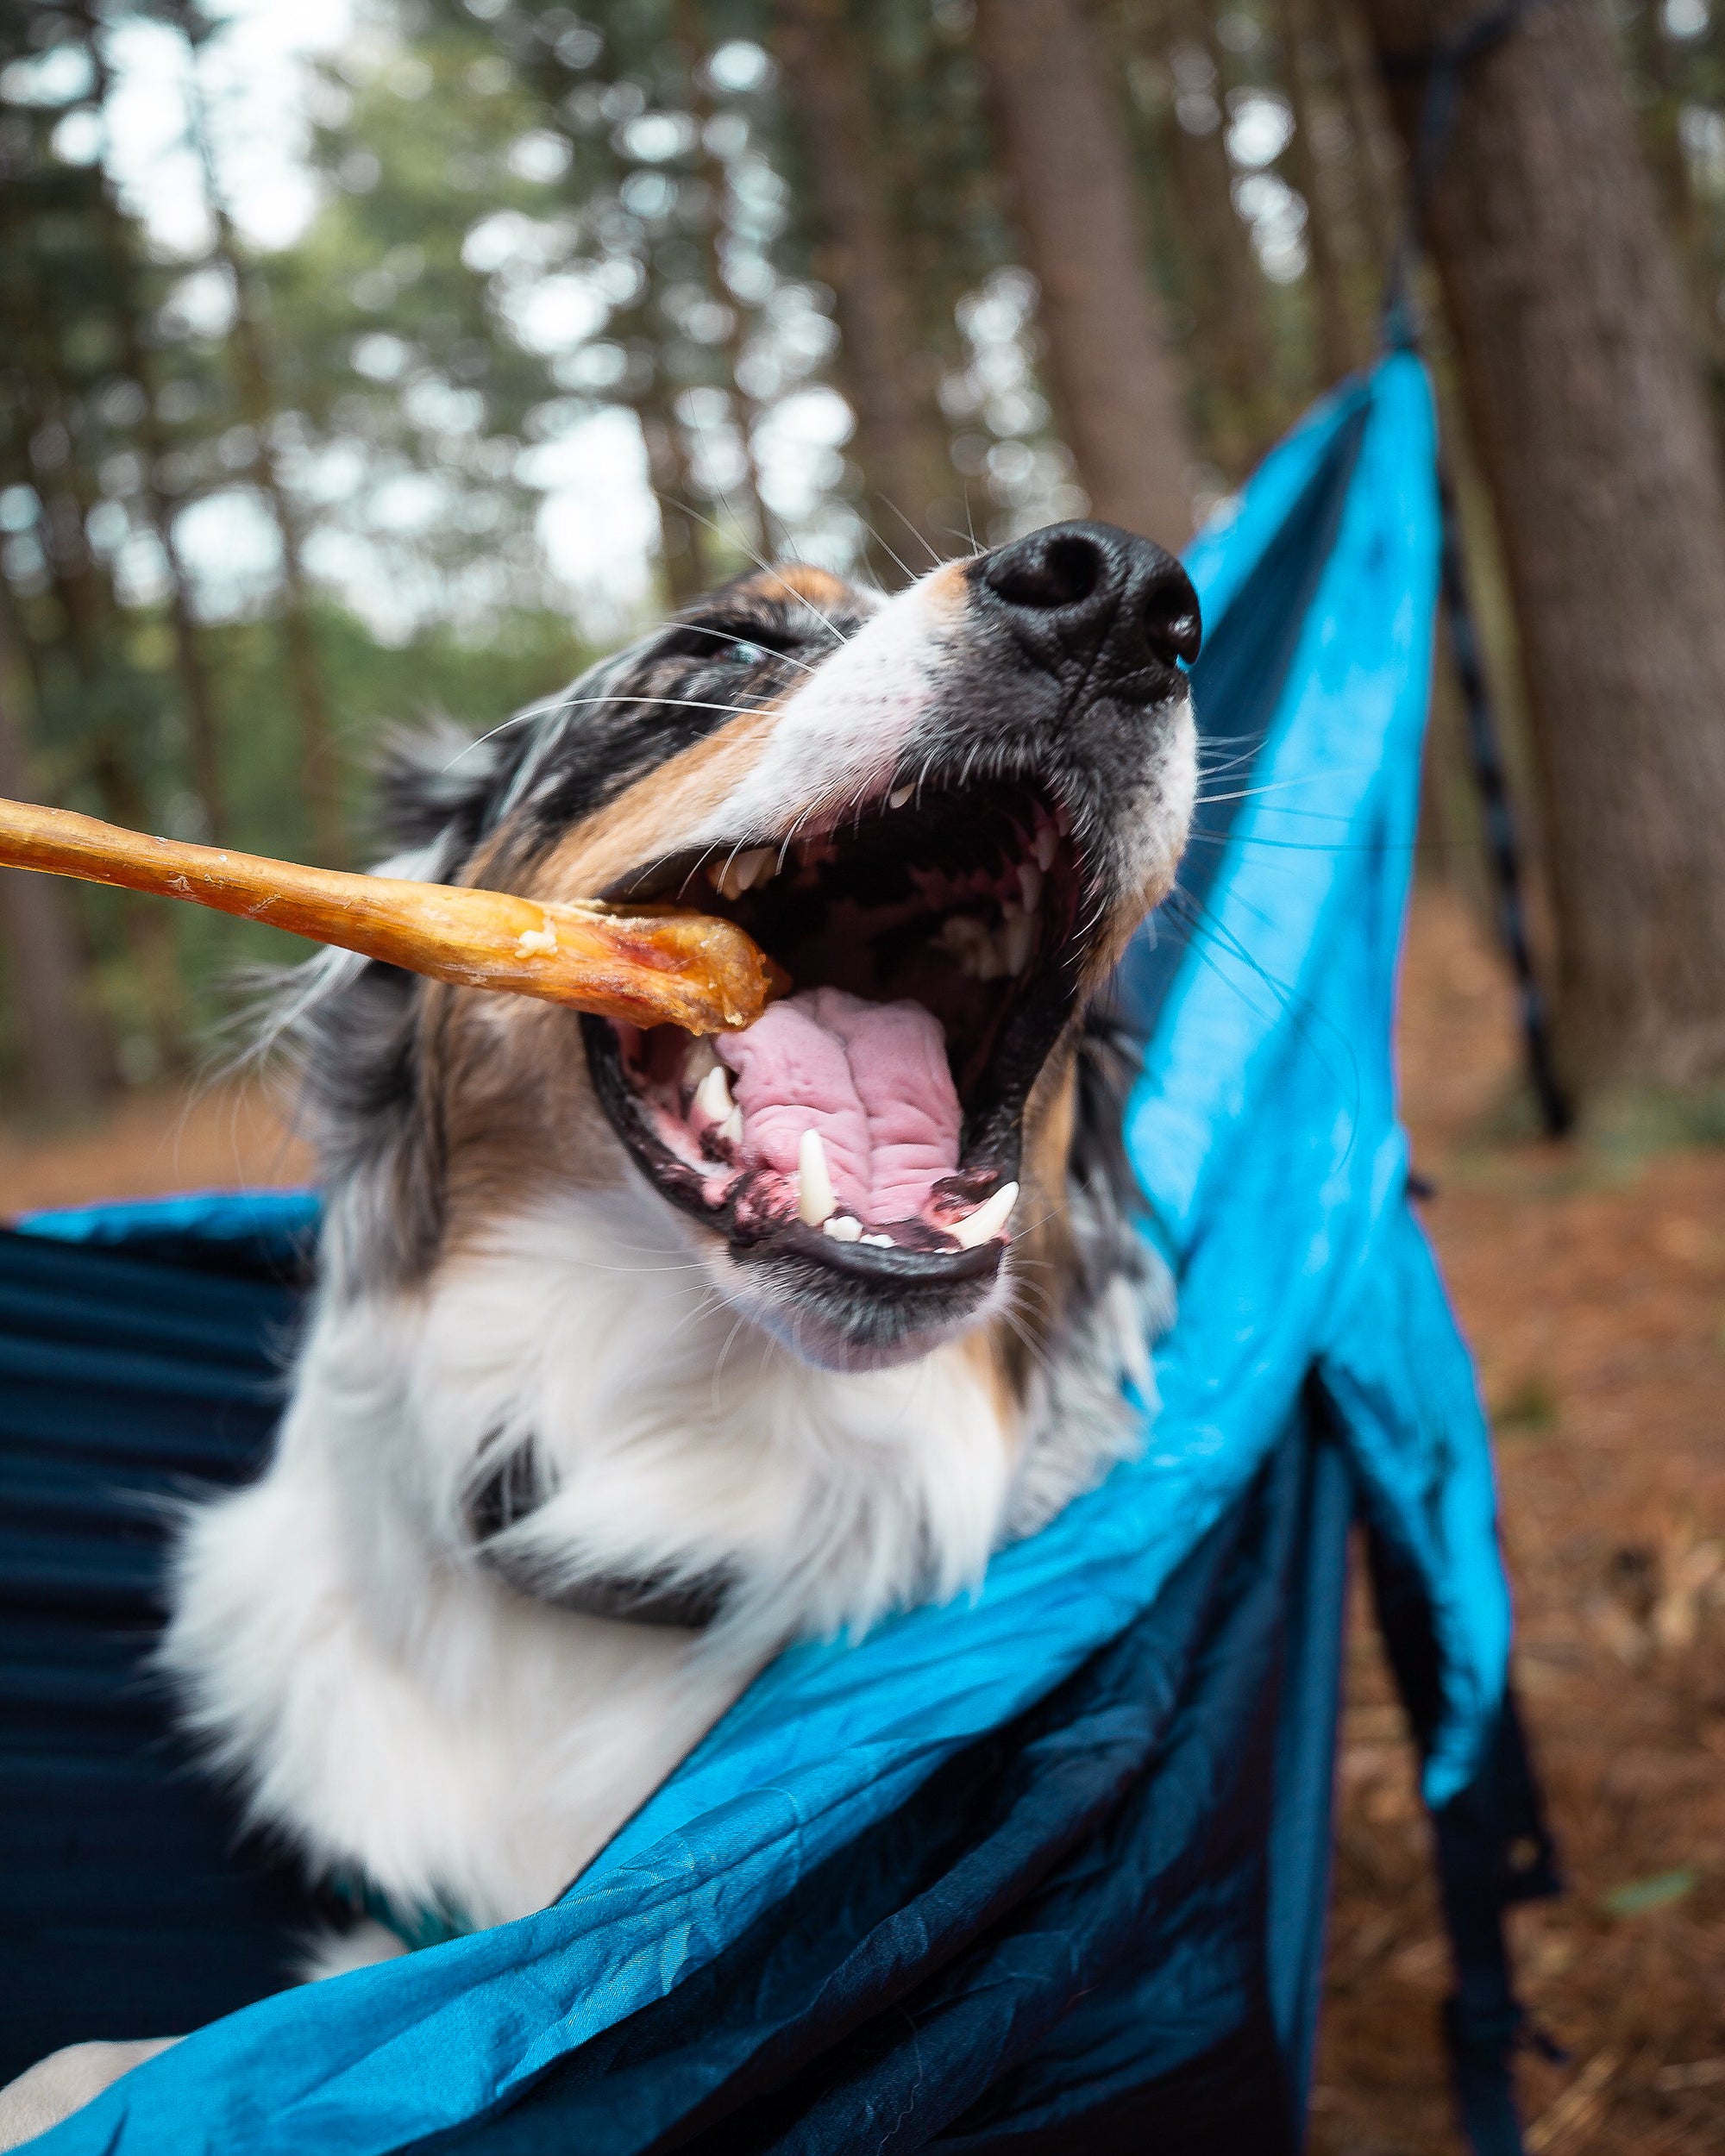 dog eating bully stick in a hammock